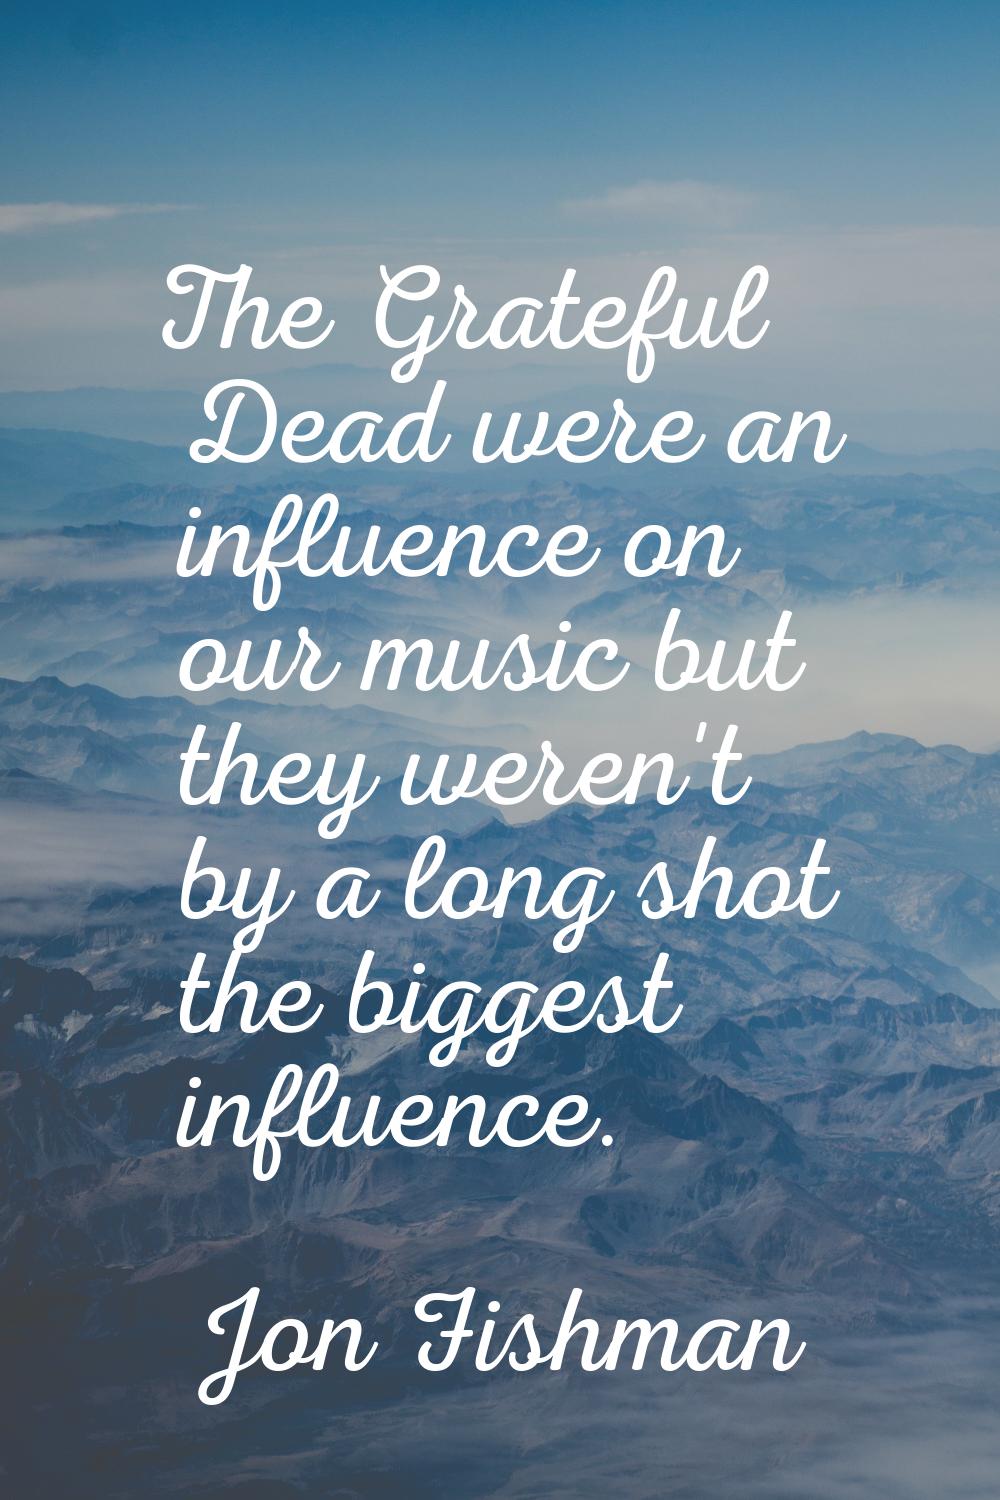 The Grateful Dead were an influence on our music but they weren't by a long shot the biggest influe